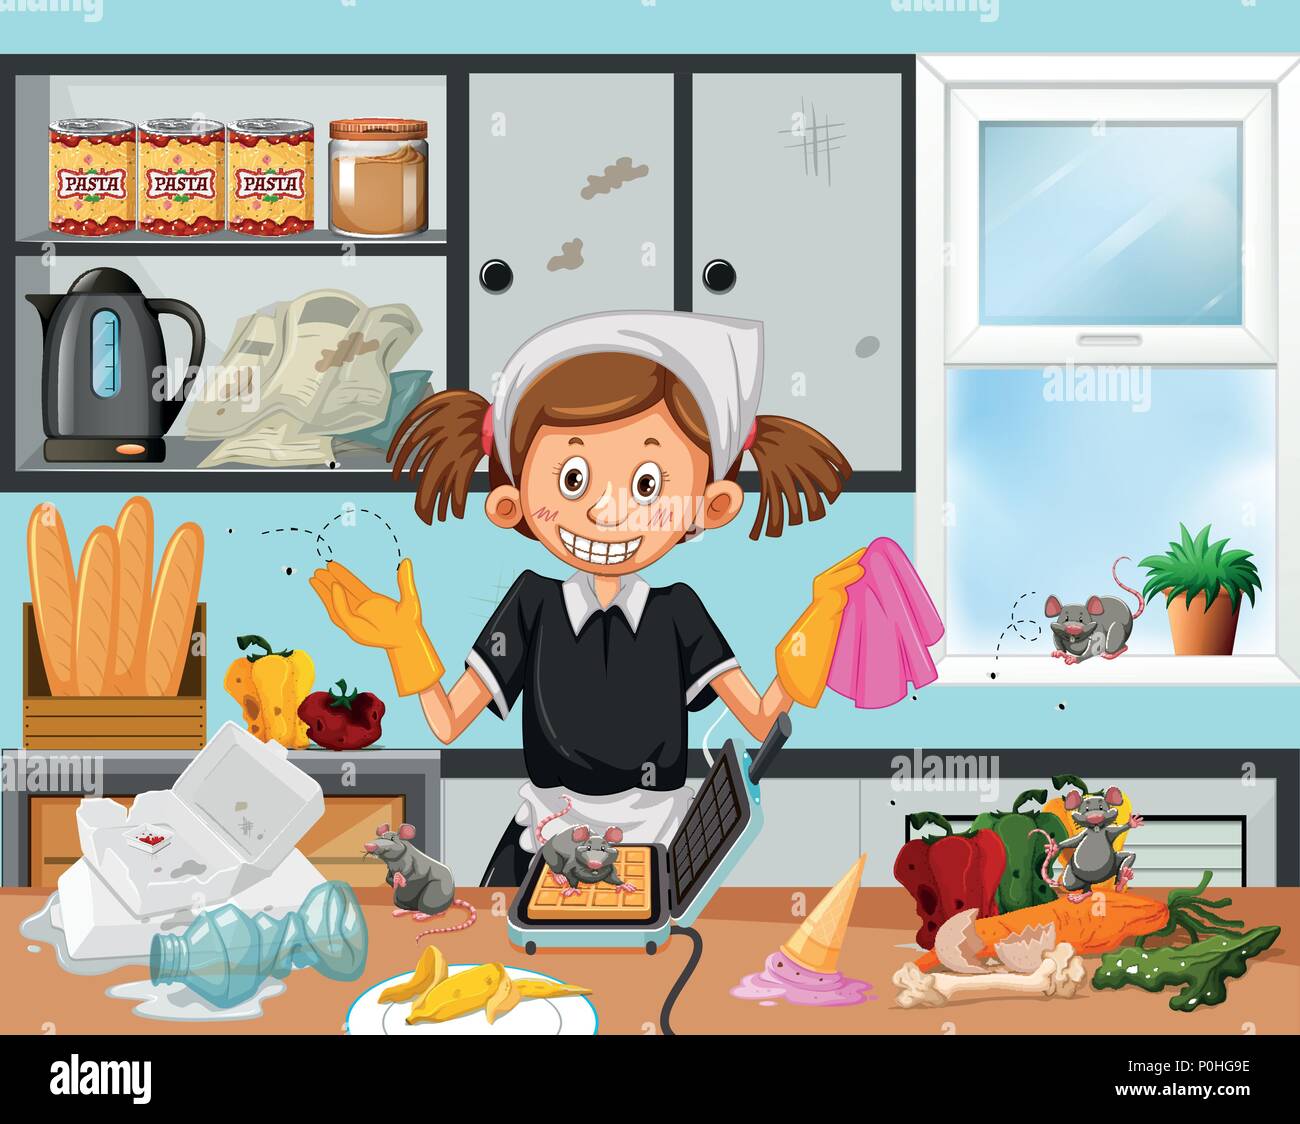 Dirty kitchen scene with housekeeper illustration Stock Vector